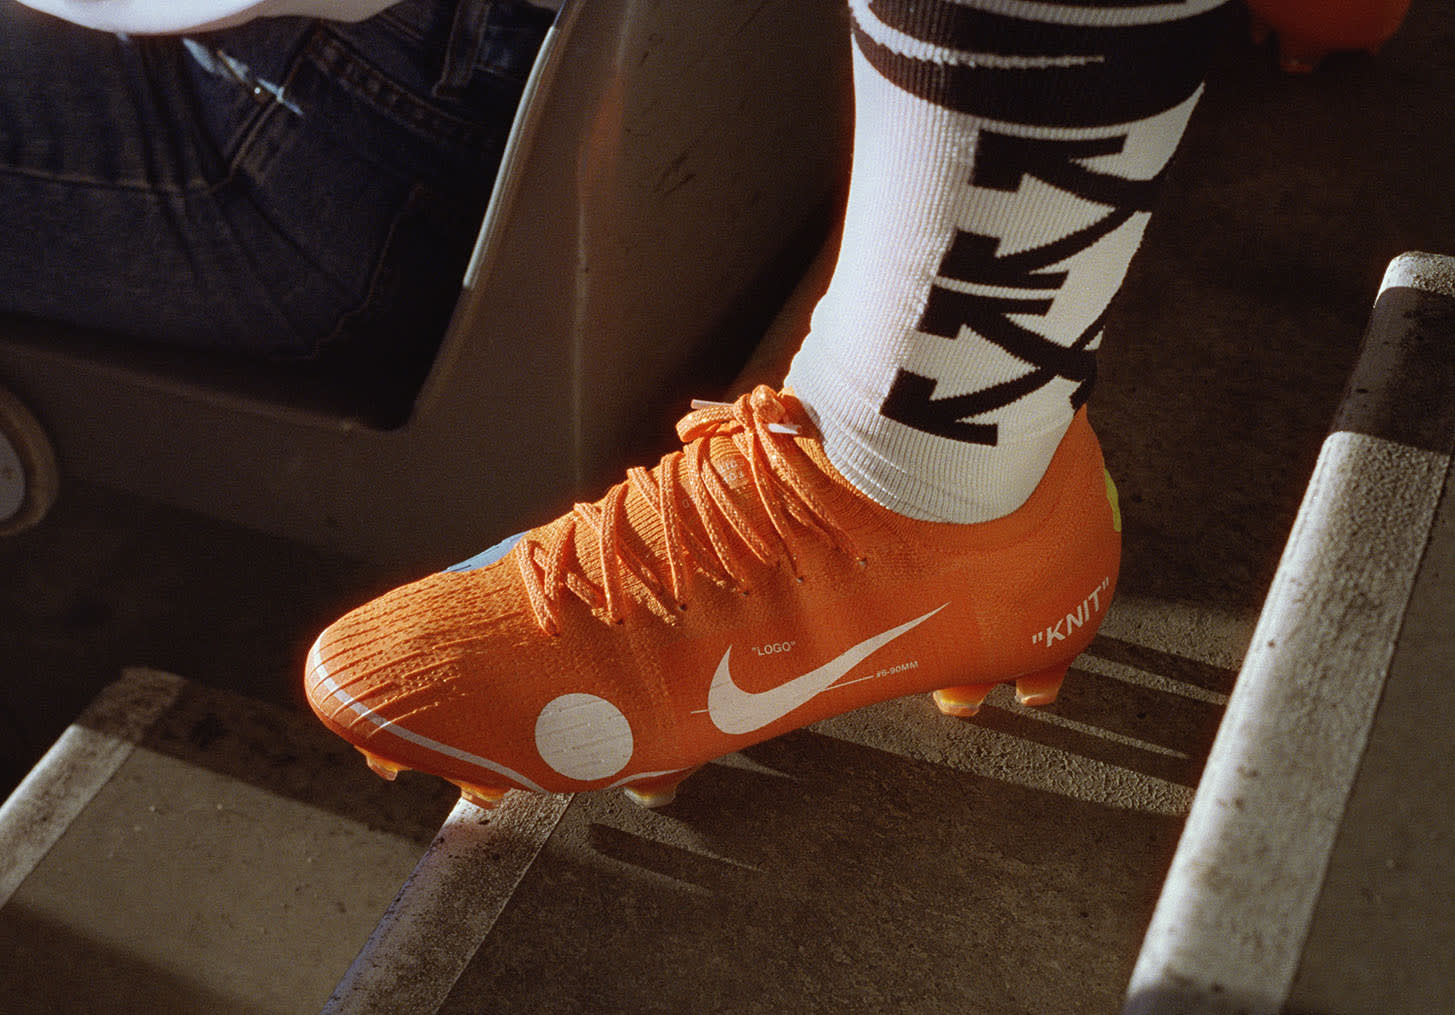 Virgil Abloh Expresses Love for Soccer with New Off-White x Nike